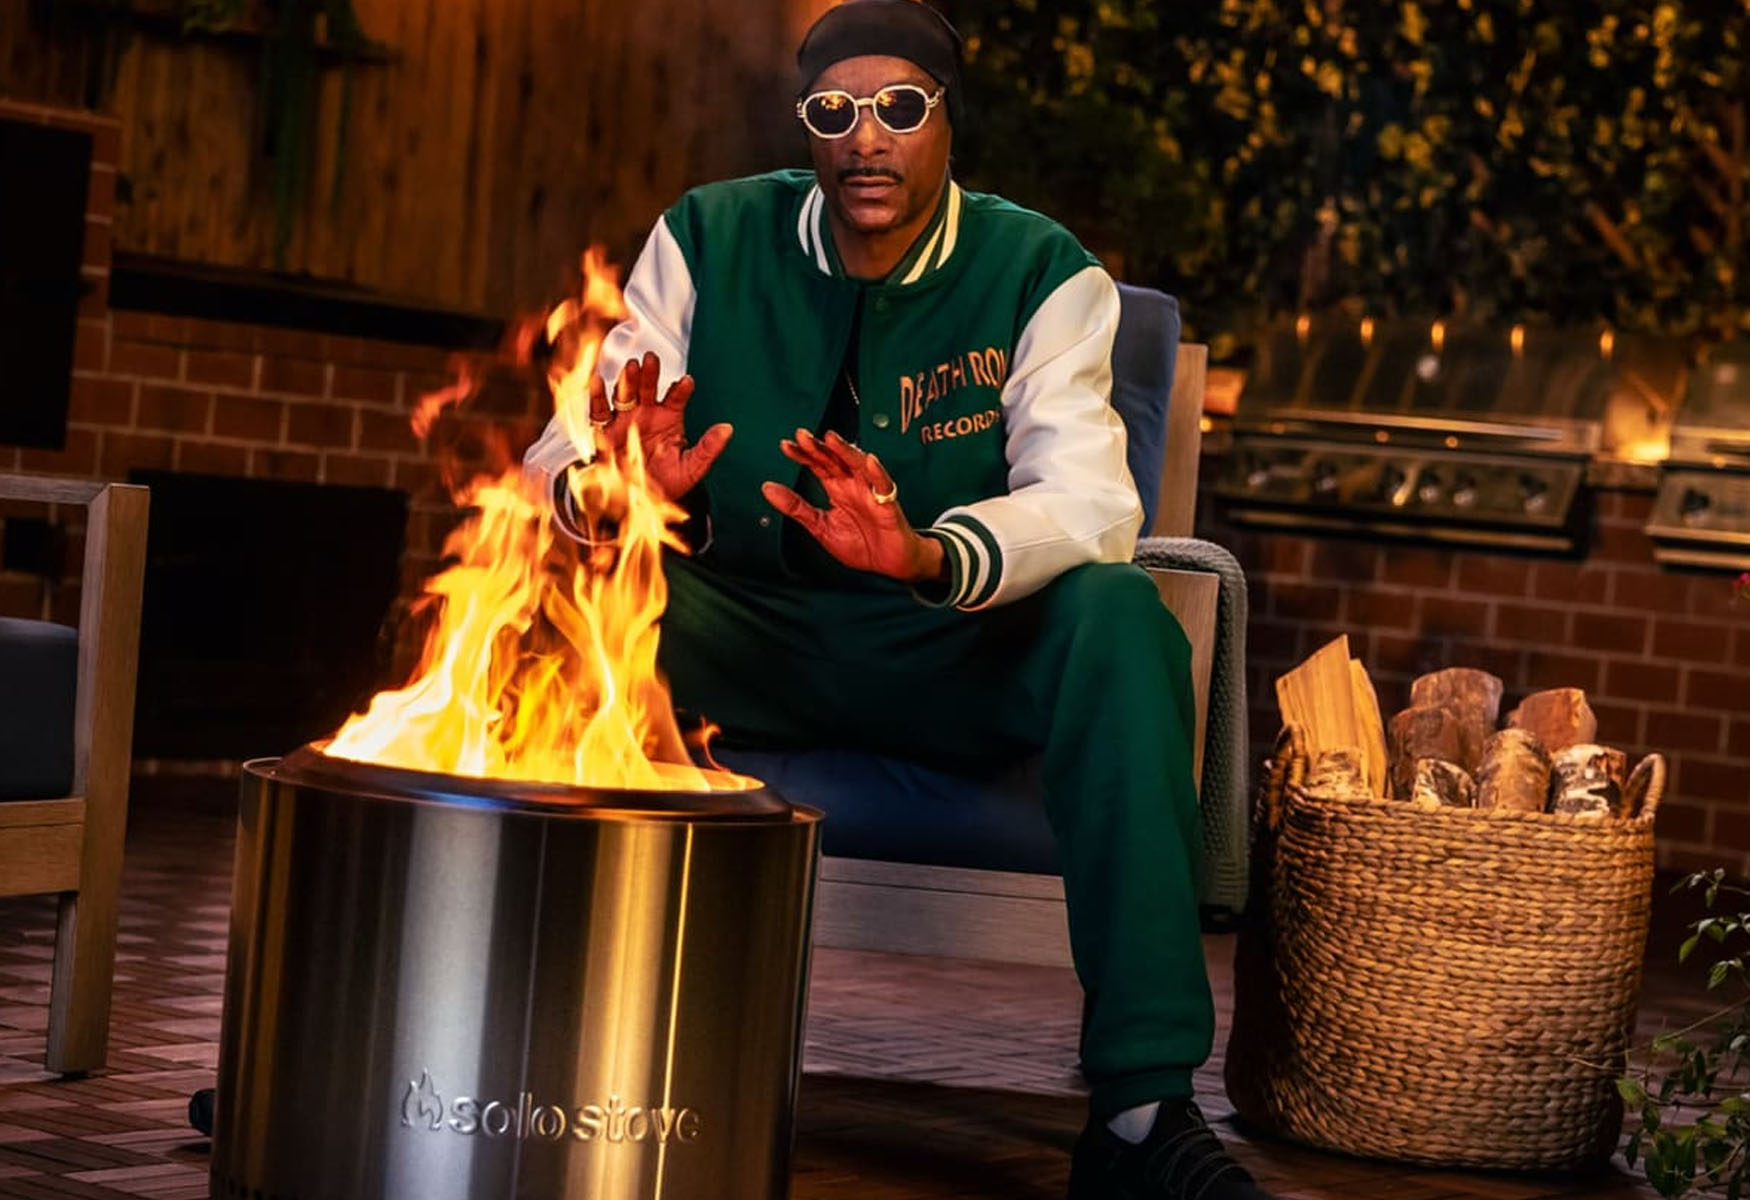 Snoop Dogg’s Smokeless Ad Backfires, Solo Stove Ousts CEO